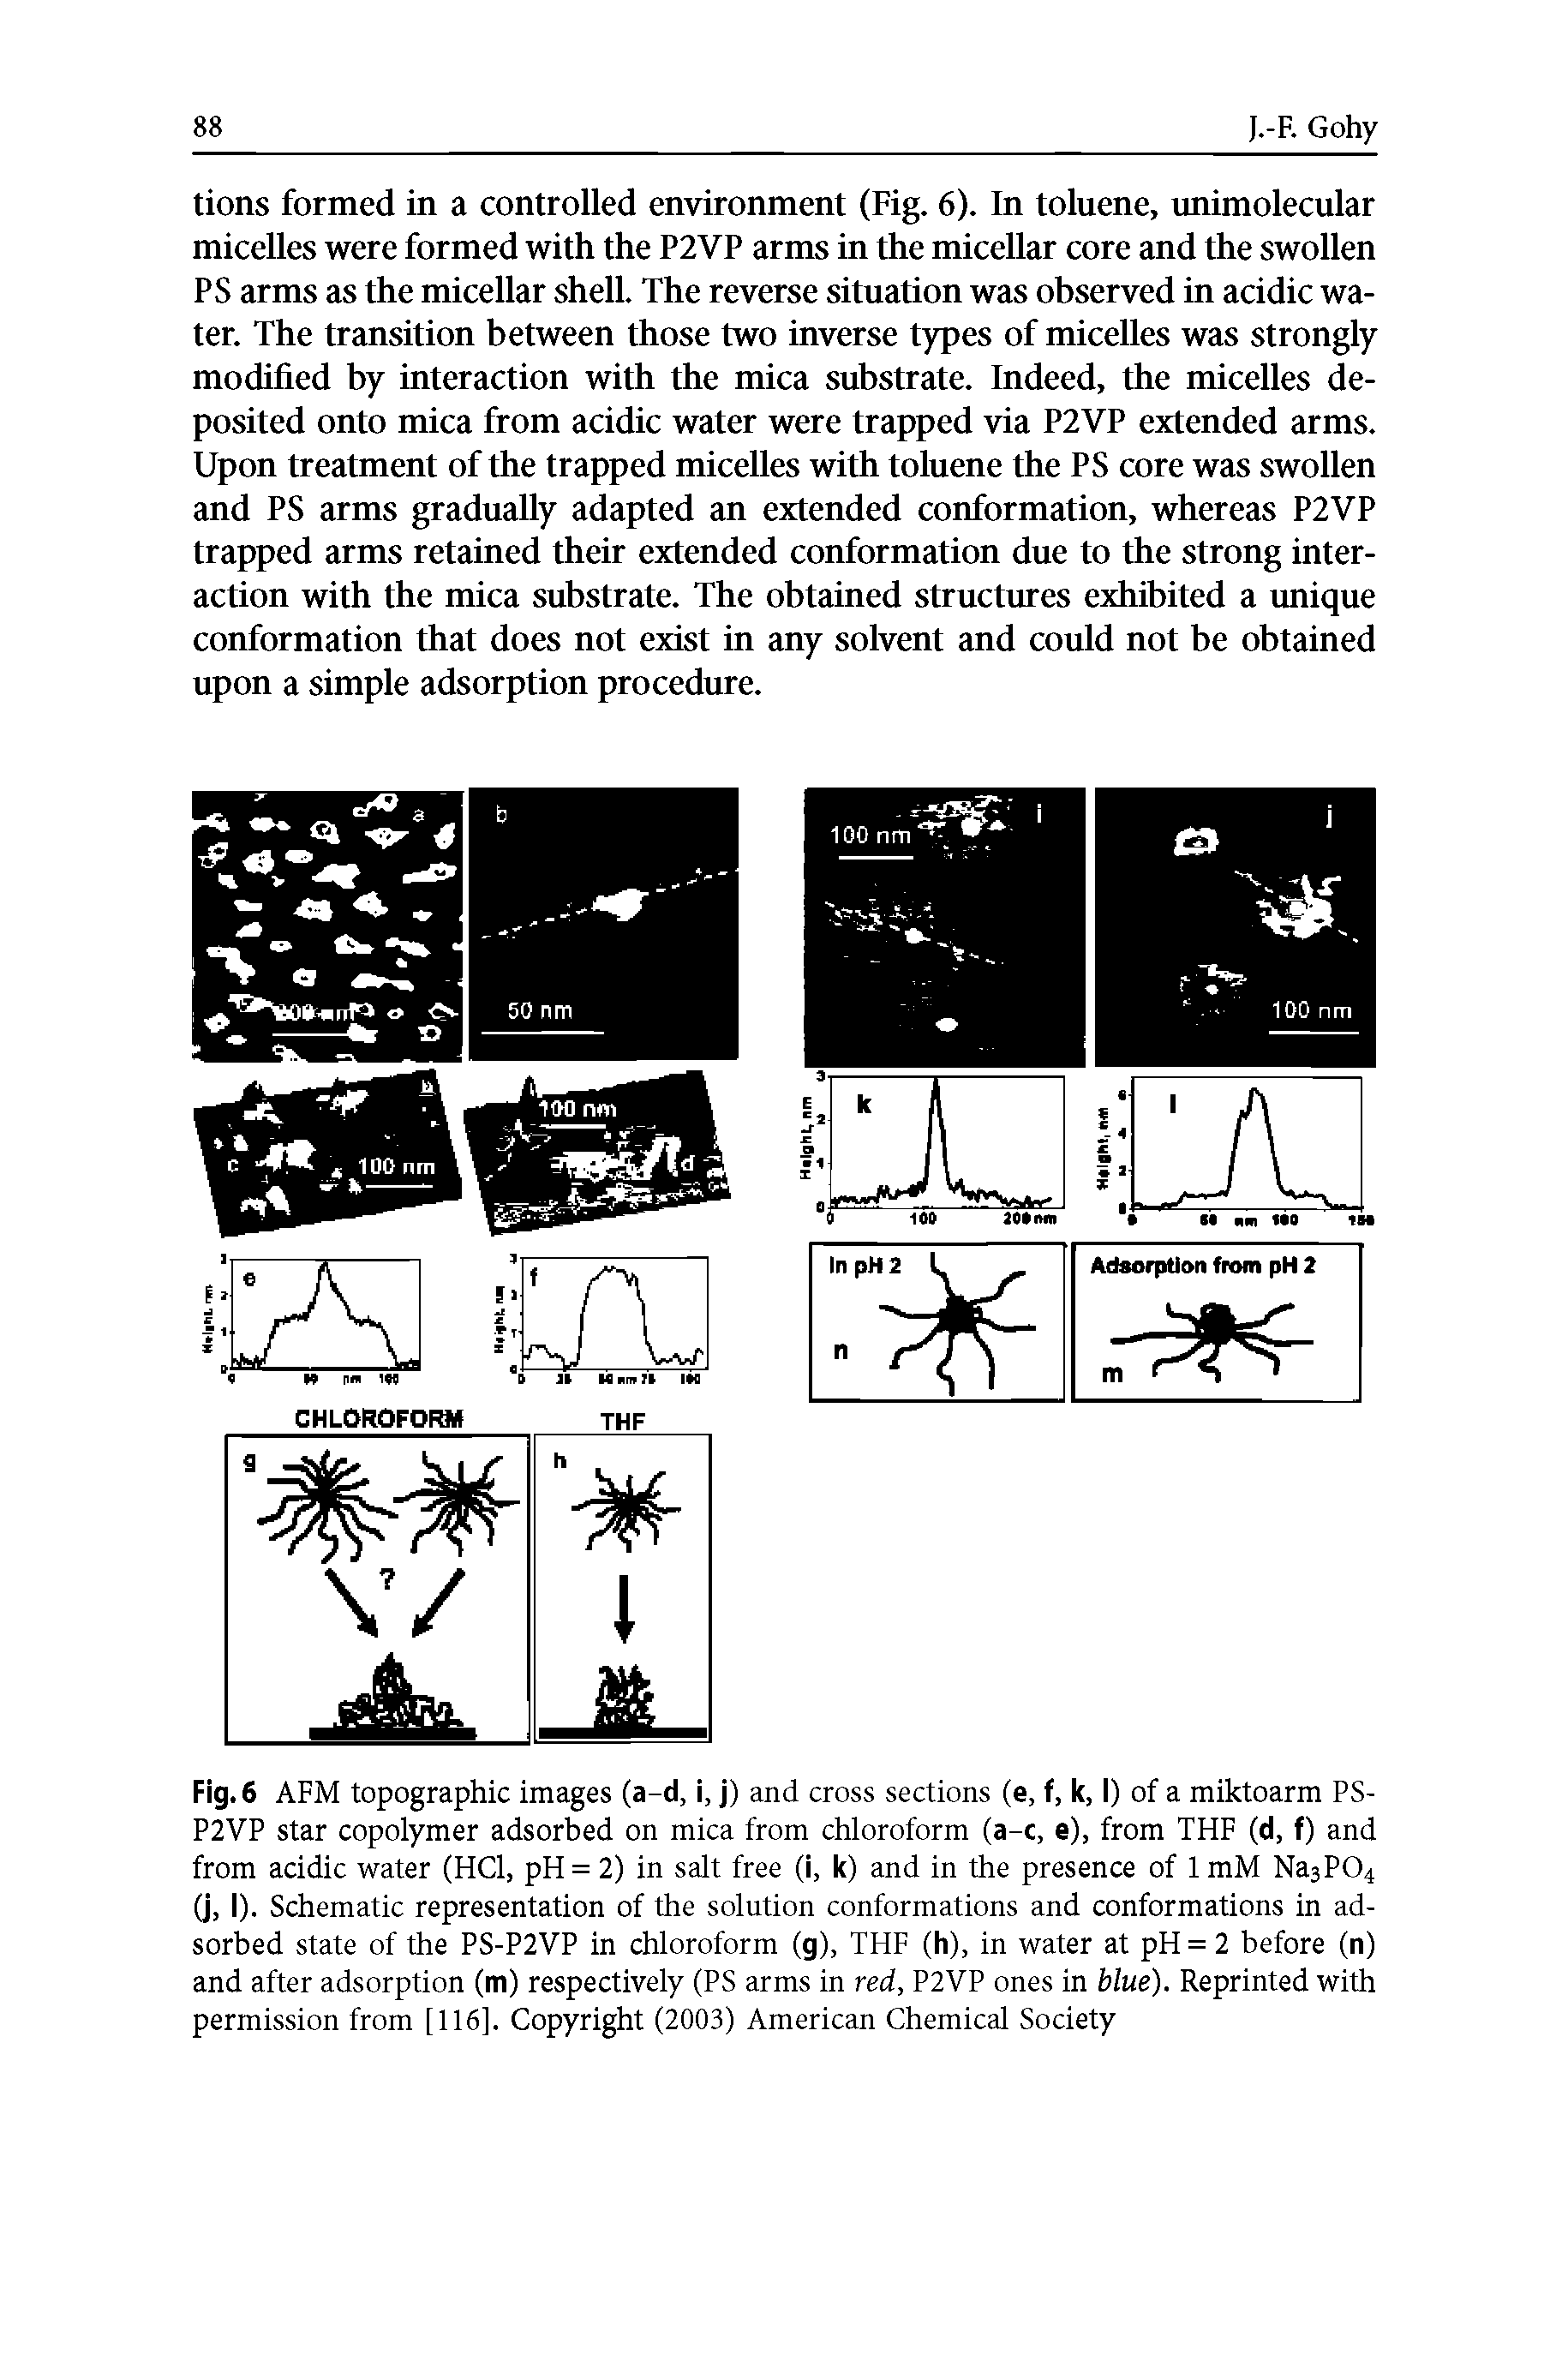 Fig. 6 AFM topographic images (a-d, i, j) and cross sections (e, f, k, I) of a miktoarm PS-P2VP star copolymer adsorbed on mica from chloroform (a-c, e), from THF (d, f) and from acidic water (HC1, pH = 2) in salt free (i, k) and in the presence of 1 mM Na3P04 (j, I). Schematic representation of the solution conformations and conformations in adsorbed state of the PS-P2VP in chloroform (g), THF (h), in water at pH = 2 before (n) and after adsorption (m) respectively (PS arms in red, P2VP ones in blue). Reprinted with permission from [116]. Copyright (2003) American Chemical Society...